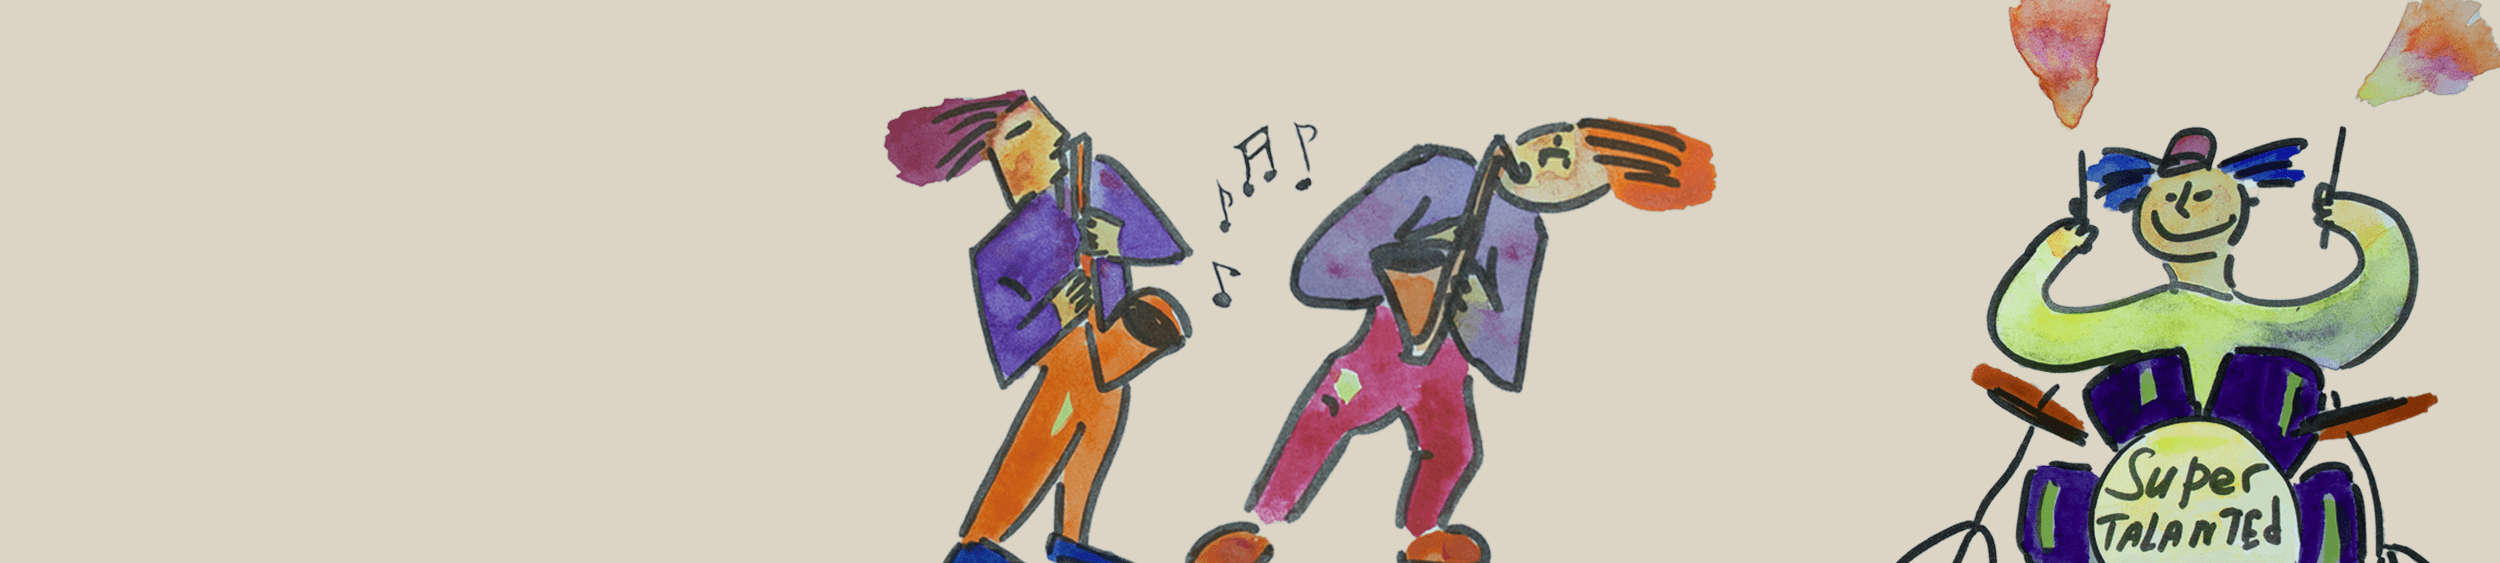 A cartoon-style band featuring two tenor saxophonists and a guitarist